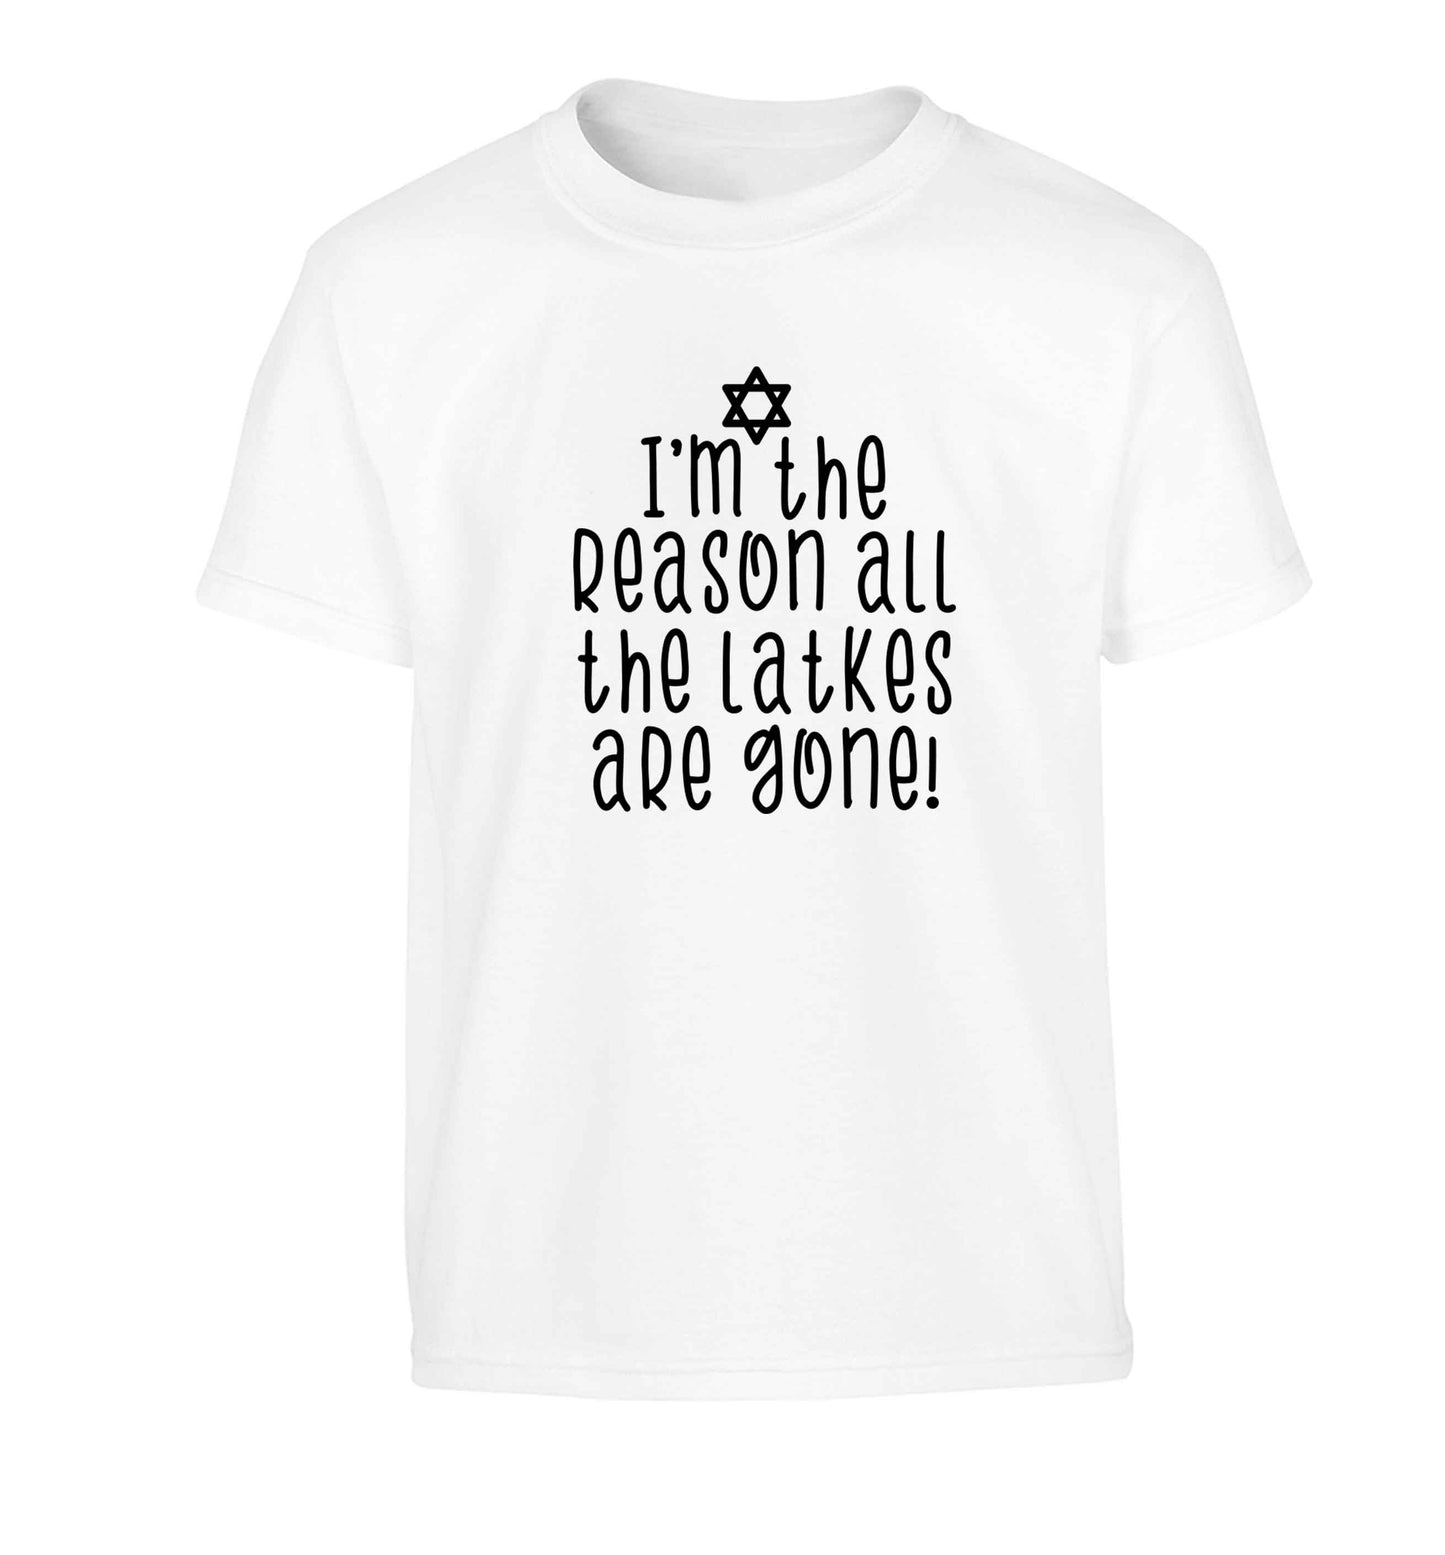 I'm the reason all the latkes are gone Children's white Tshirt 12-13 Years